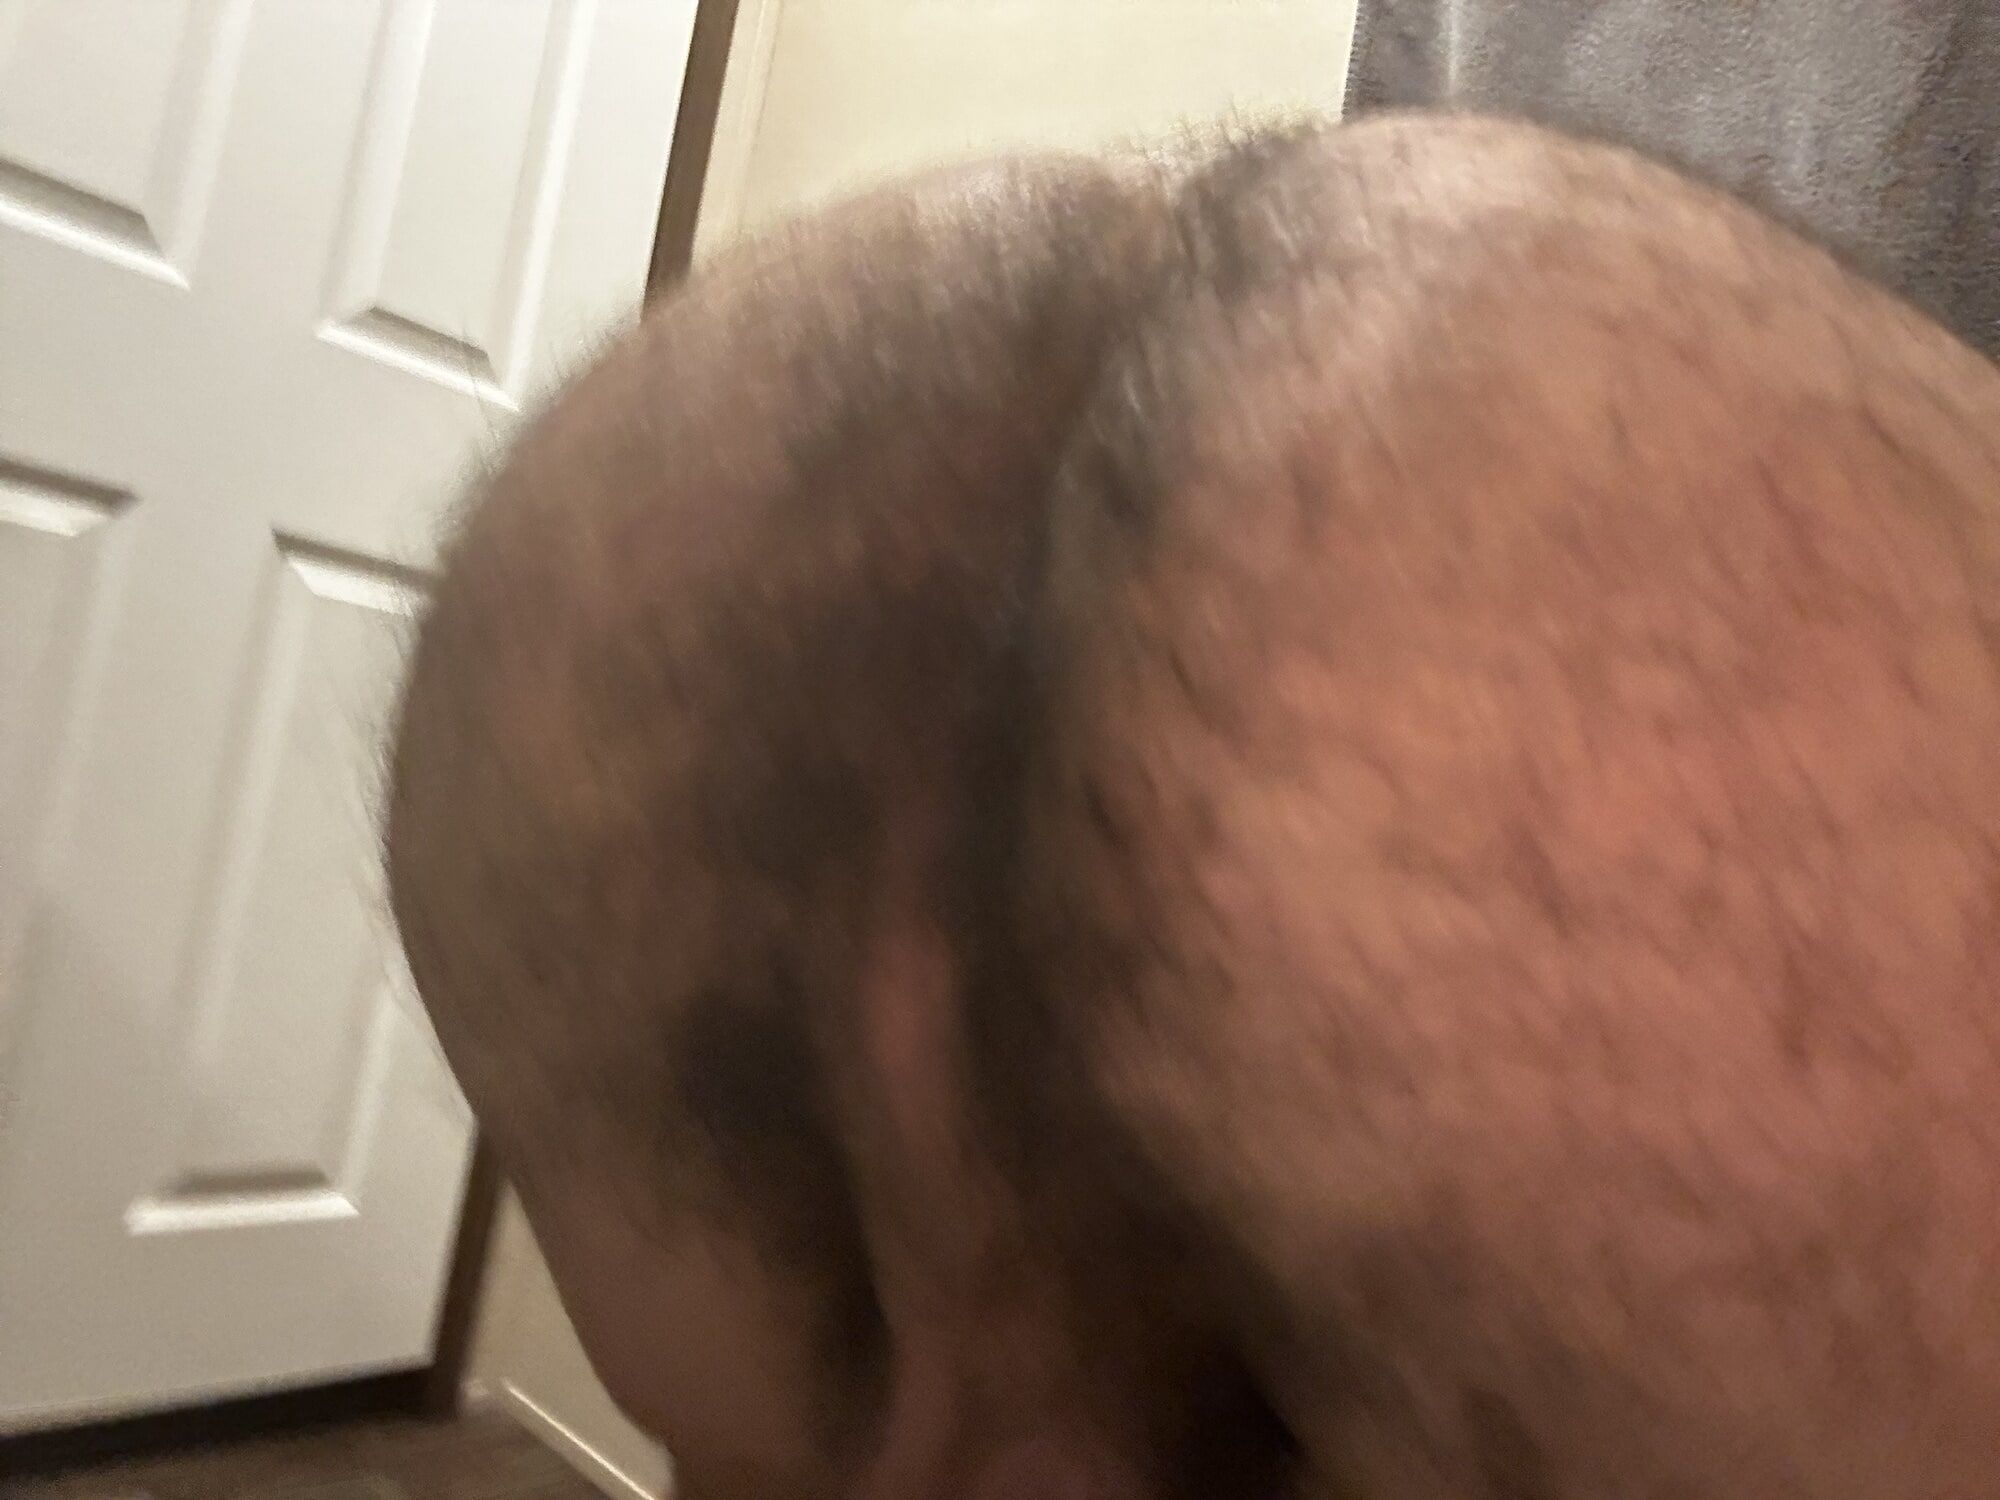 Big Fat Hairy Virgin Ass Ready to be Smacked and eaten #2